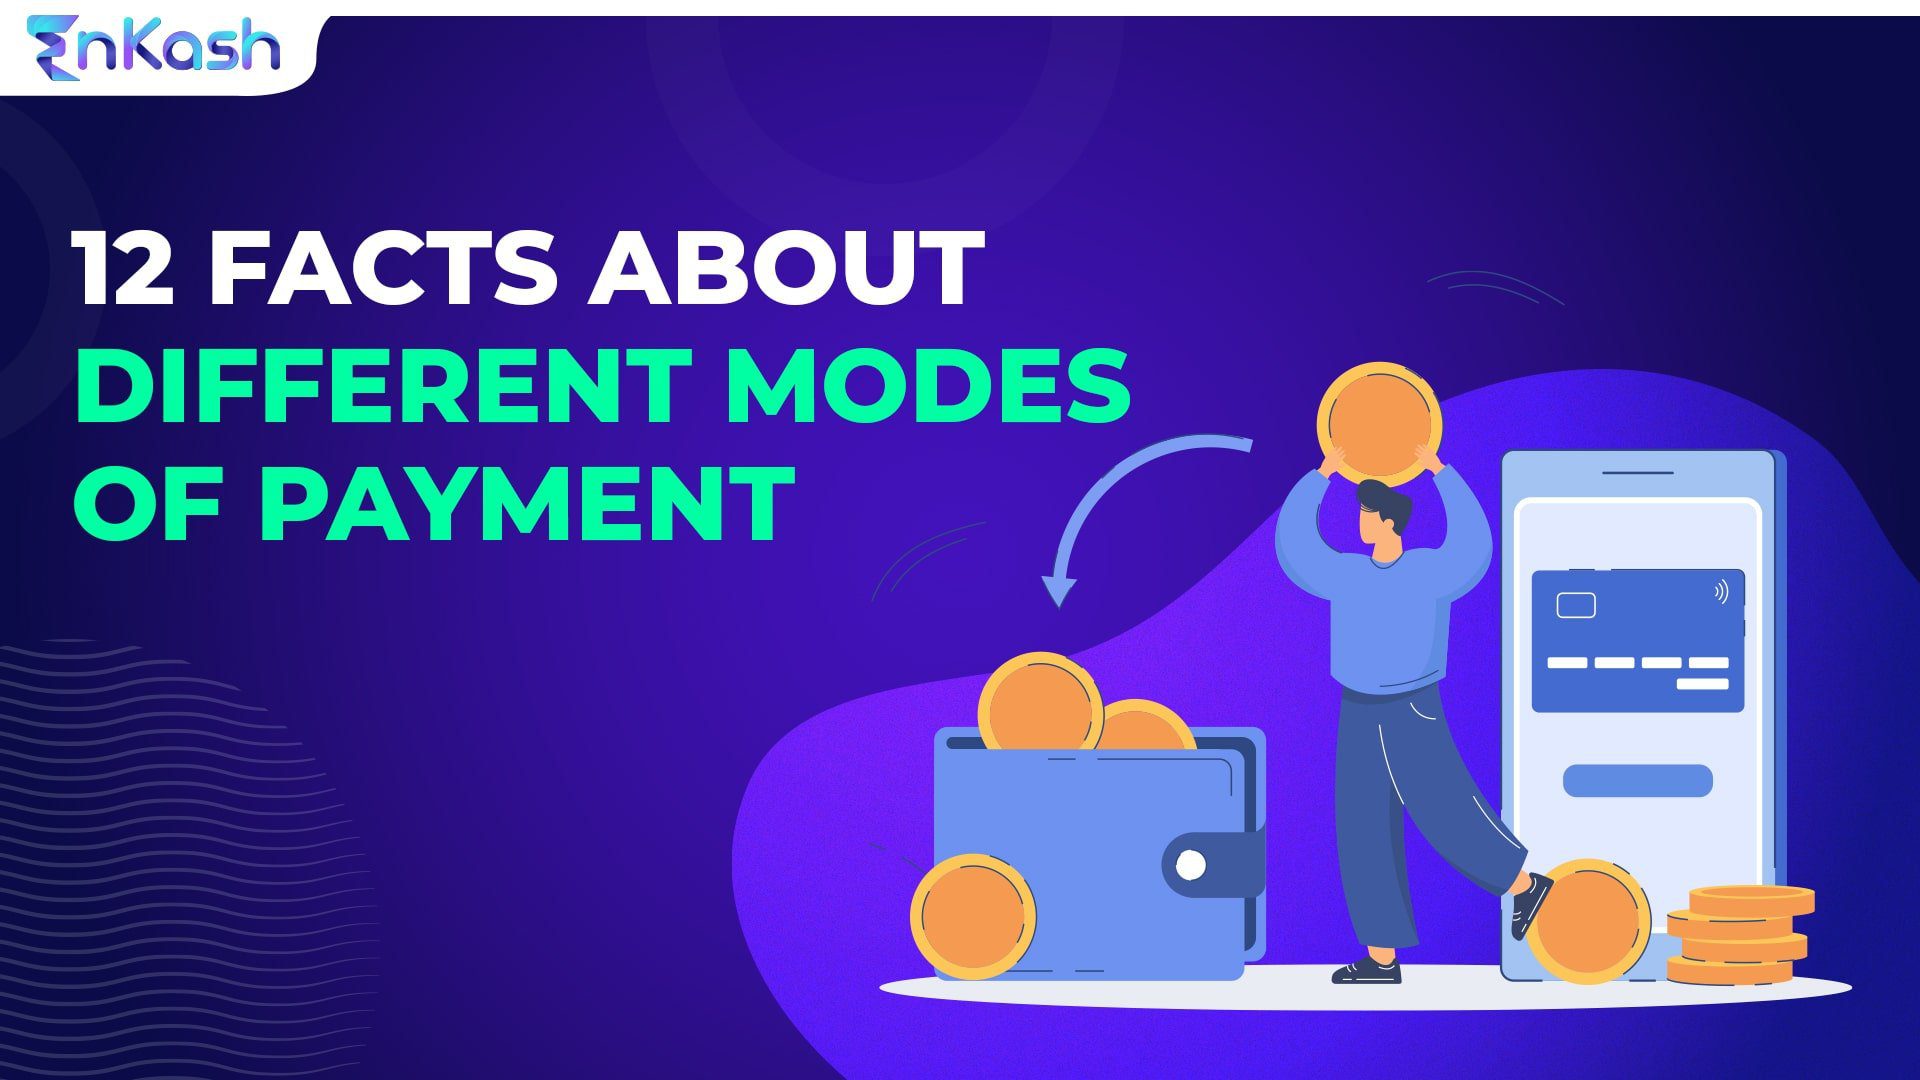 Different modes of payment